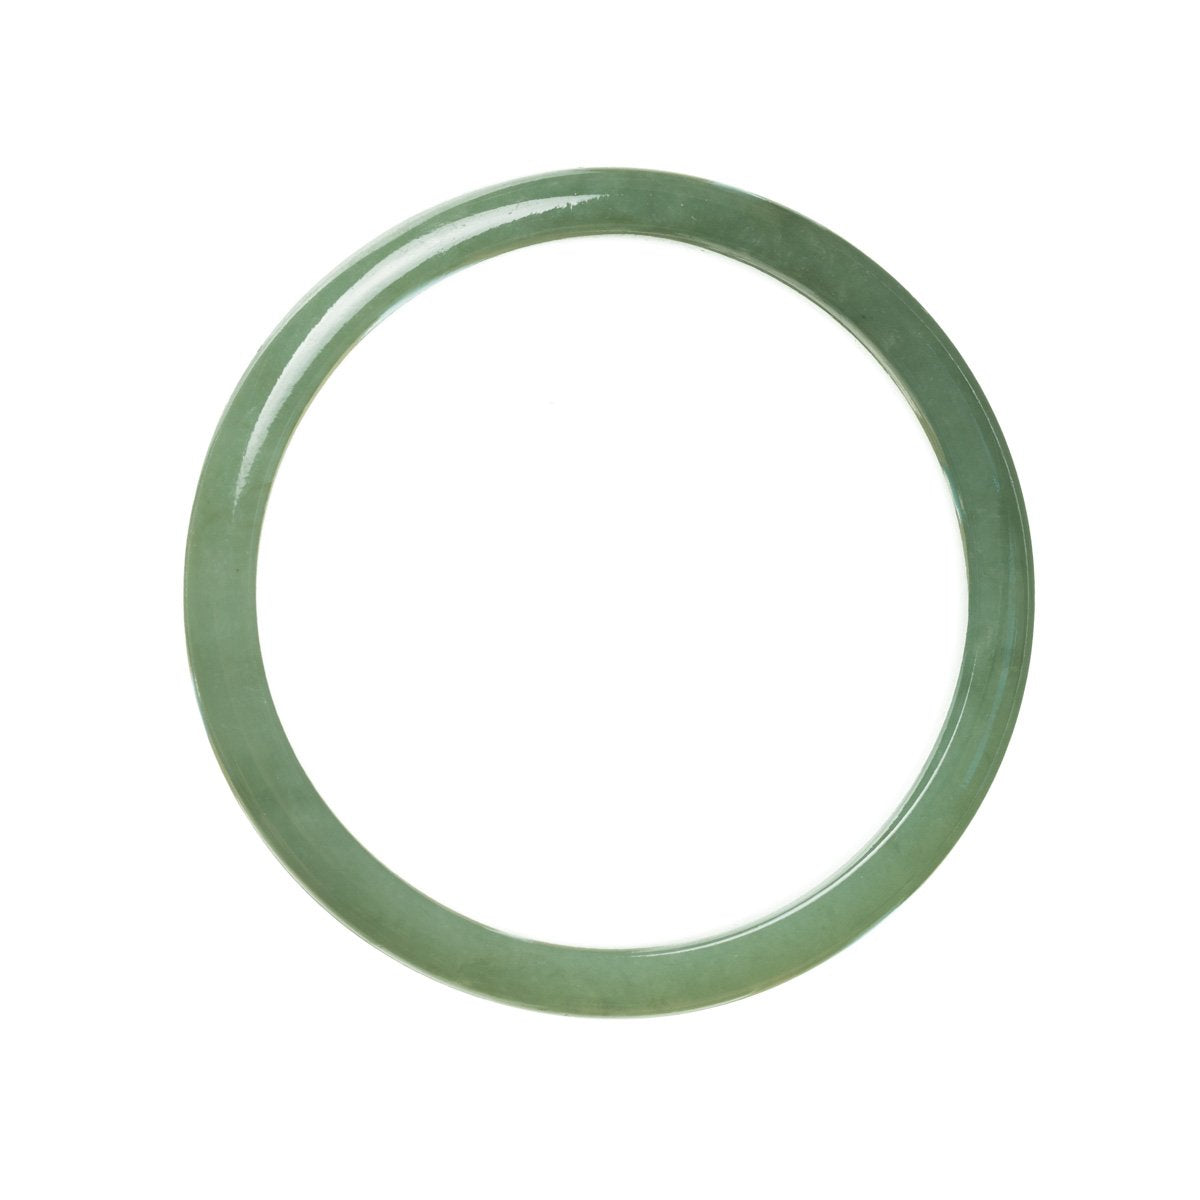 A close-up image of a Real Grade A Green Jade Bangle. The bangle is 59mm in diameter and has a semi-round shape. It is a high-quality piece of jewelry from the brand MAYS™.